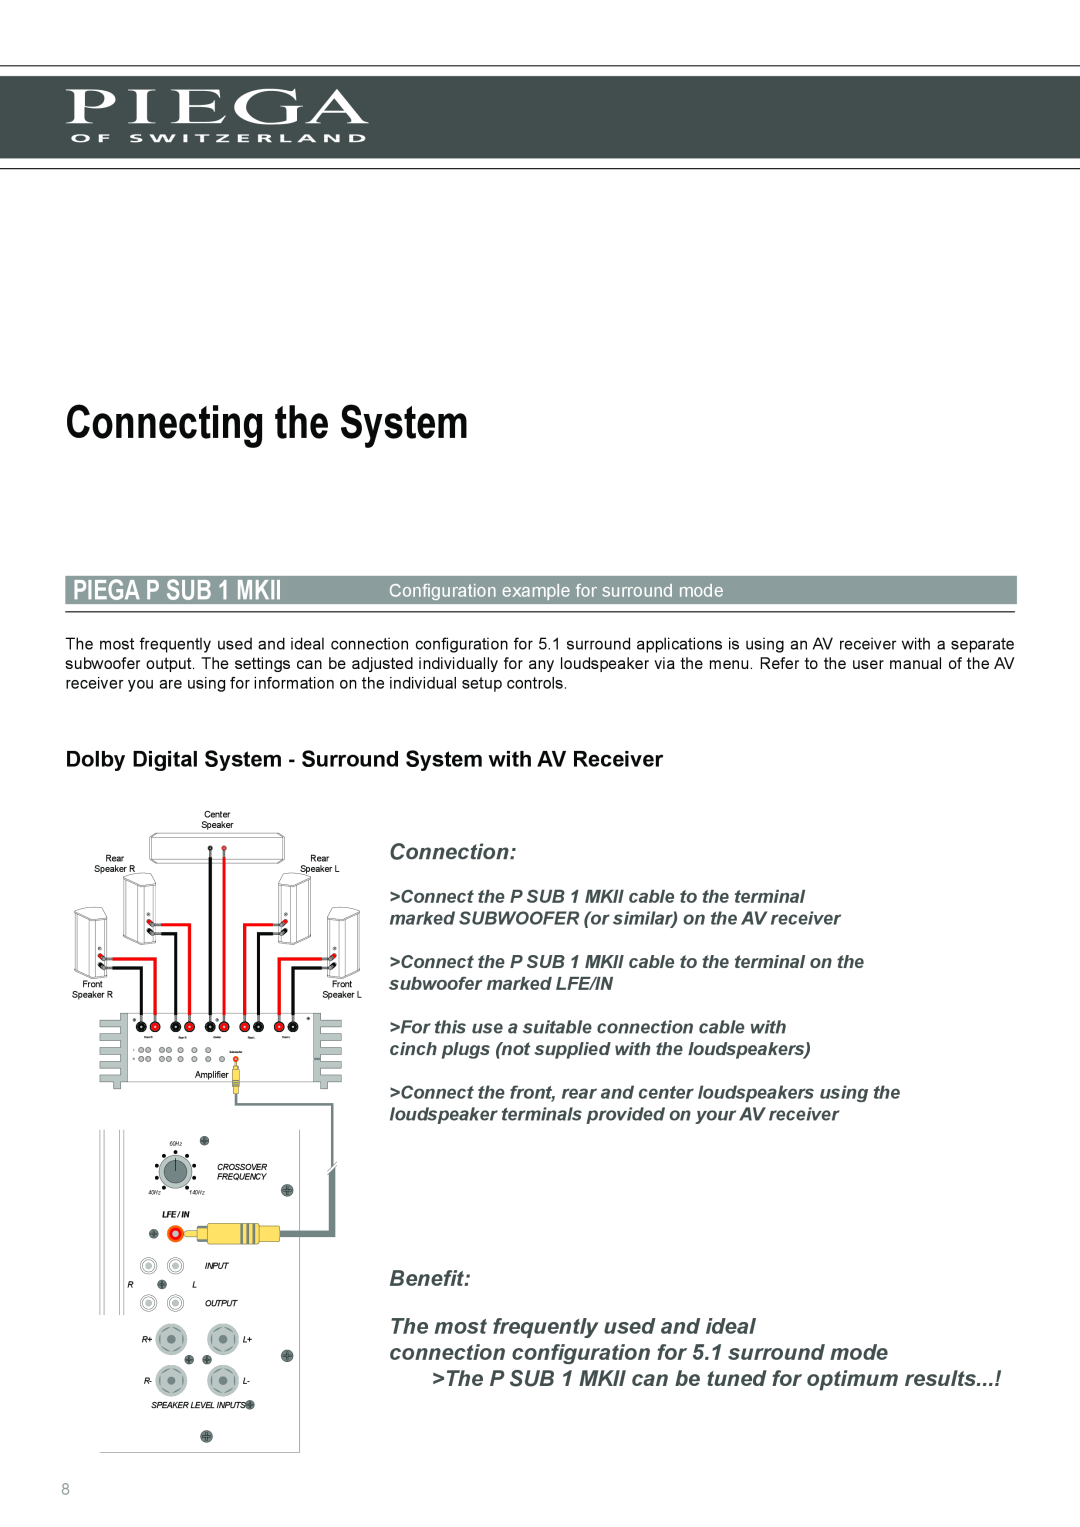 Piega user manual Connecting the System, Connection, Benefit The most frequently used and ideal, PIEGA P SUB 1 MKII 